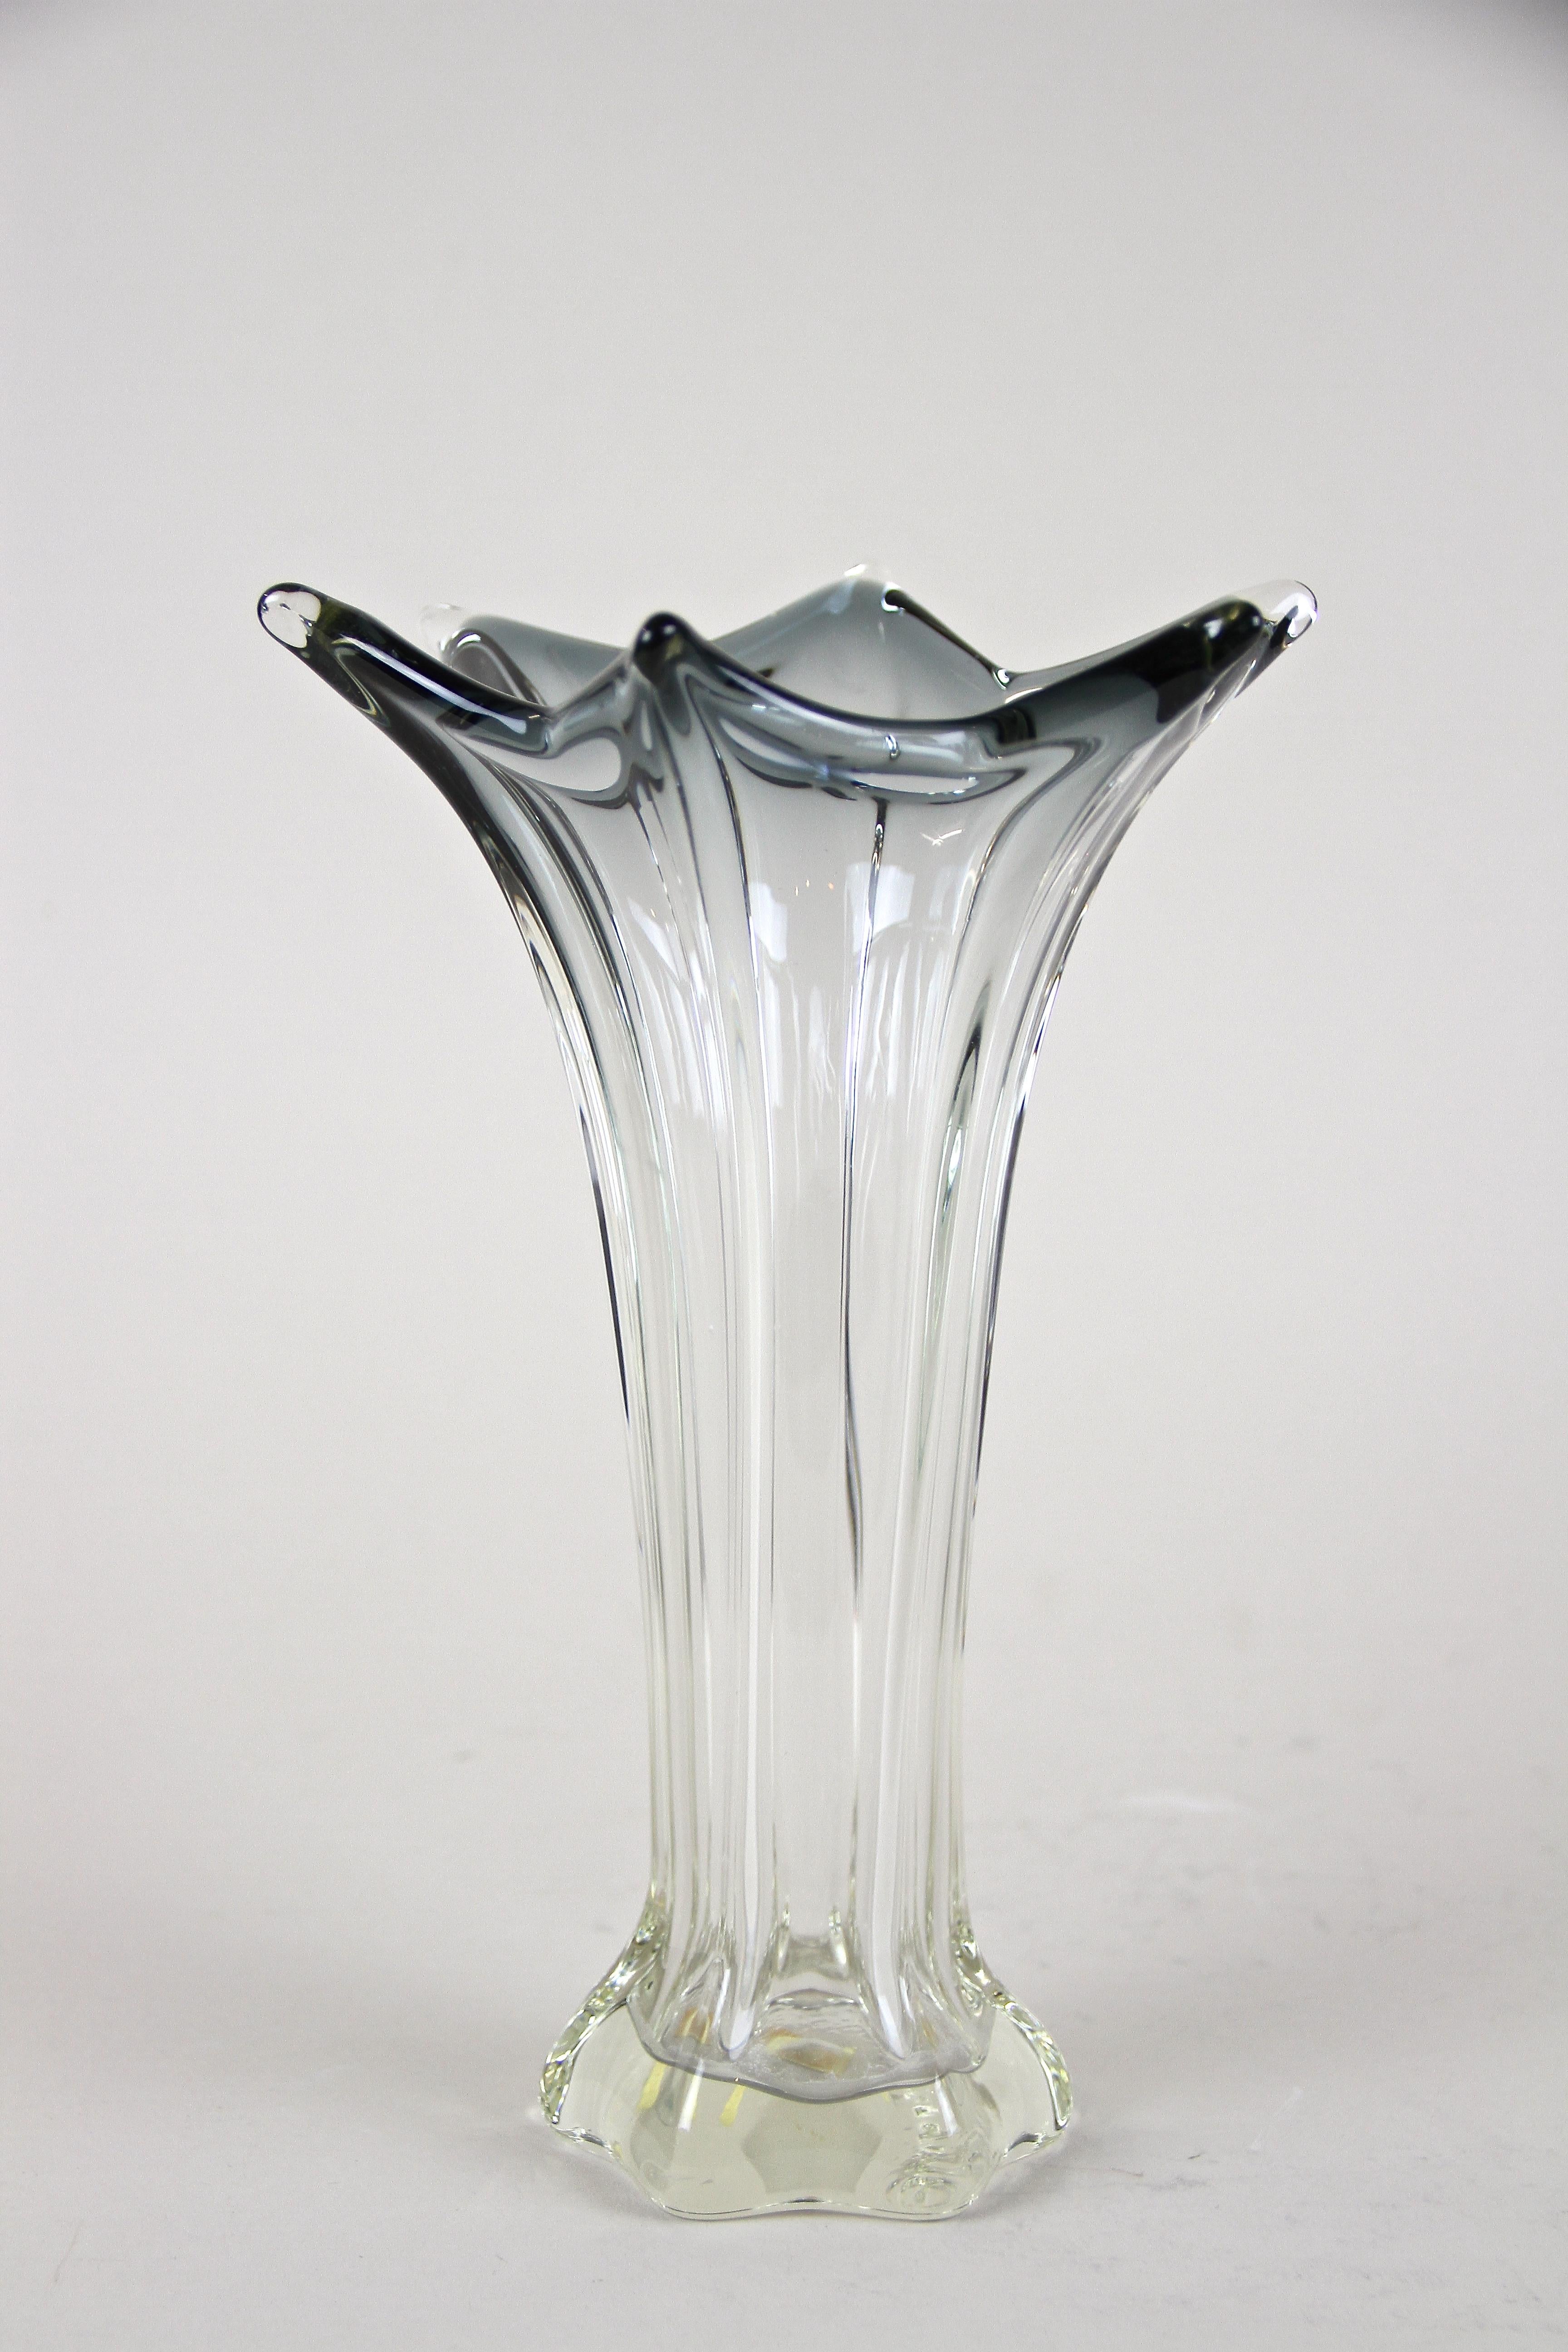 Very decorative mid century Murano Glass Vase out of the renown workshops of Vetro Artistico Veneziano in Italy from around 1960/70. The lovely shaped clear glass body alongside the decent black colored edge confers this murano piece an absolute